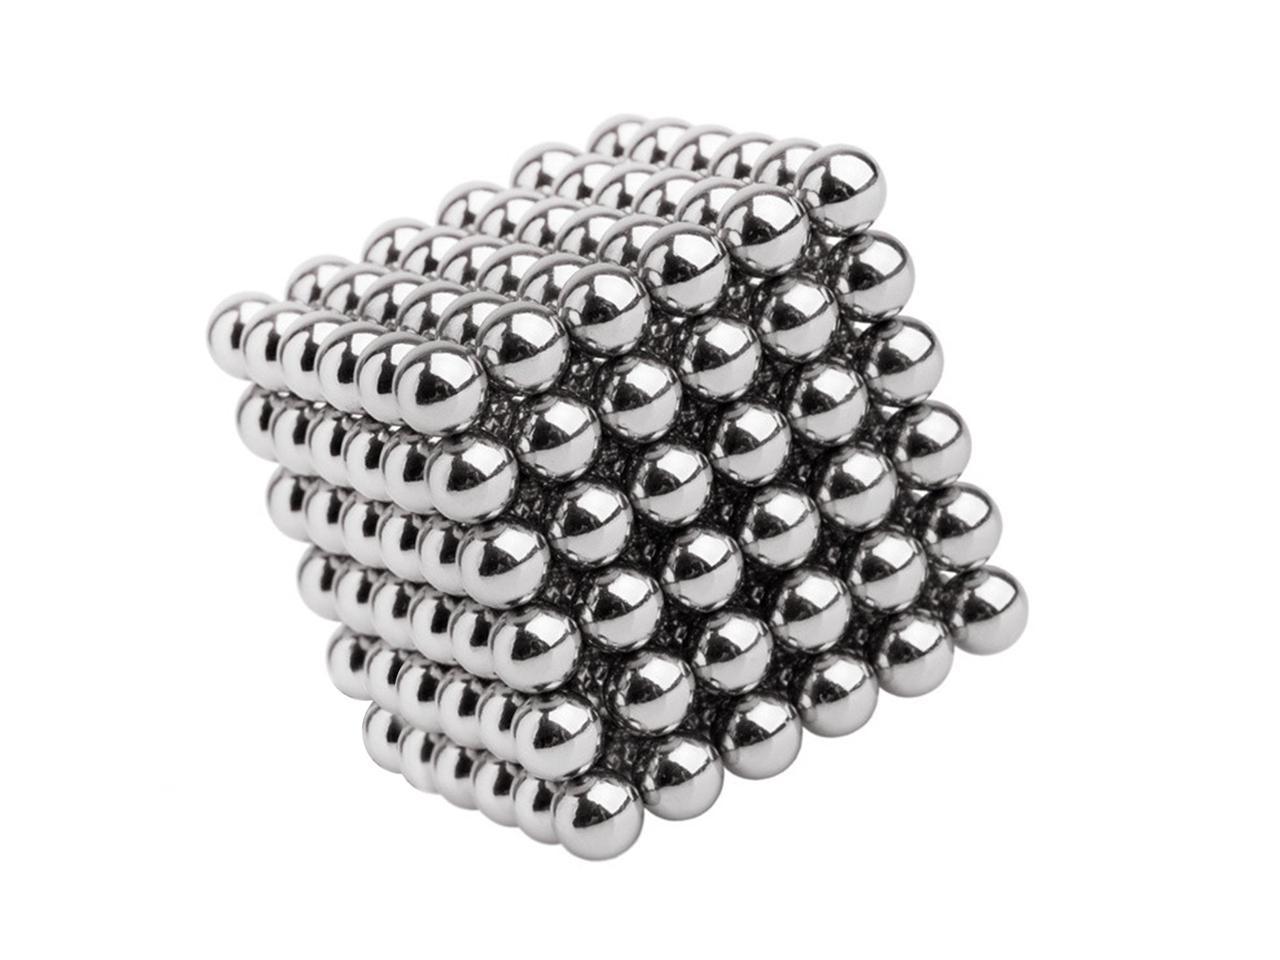 RQW 1000 PCS 3MM Powerful Magnetic Sculpture Magnet Building Blocks Fidget Toys Desk Decor for Intelligence Development and Stress Relief for Adults Silver 